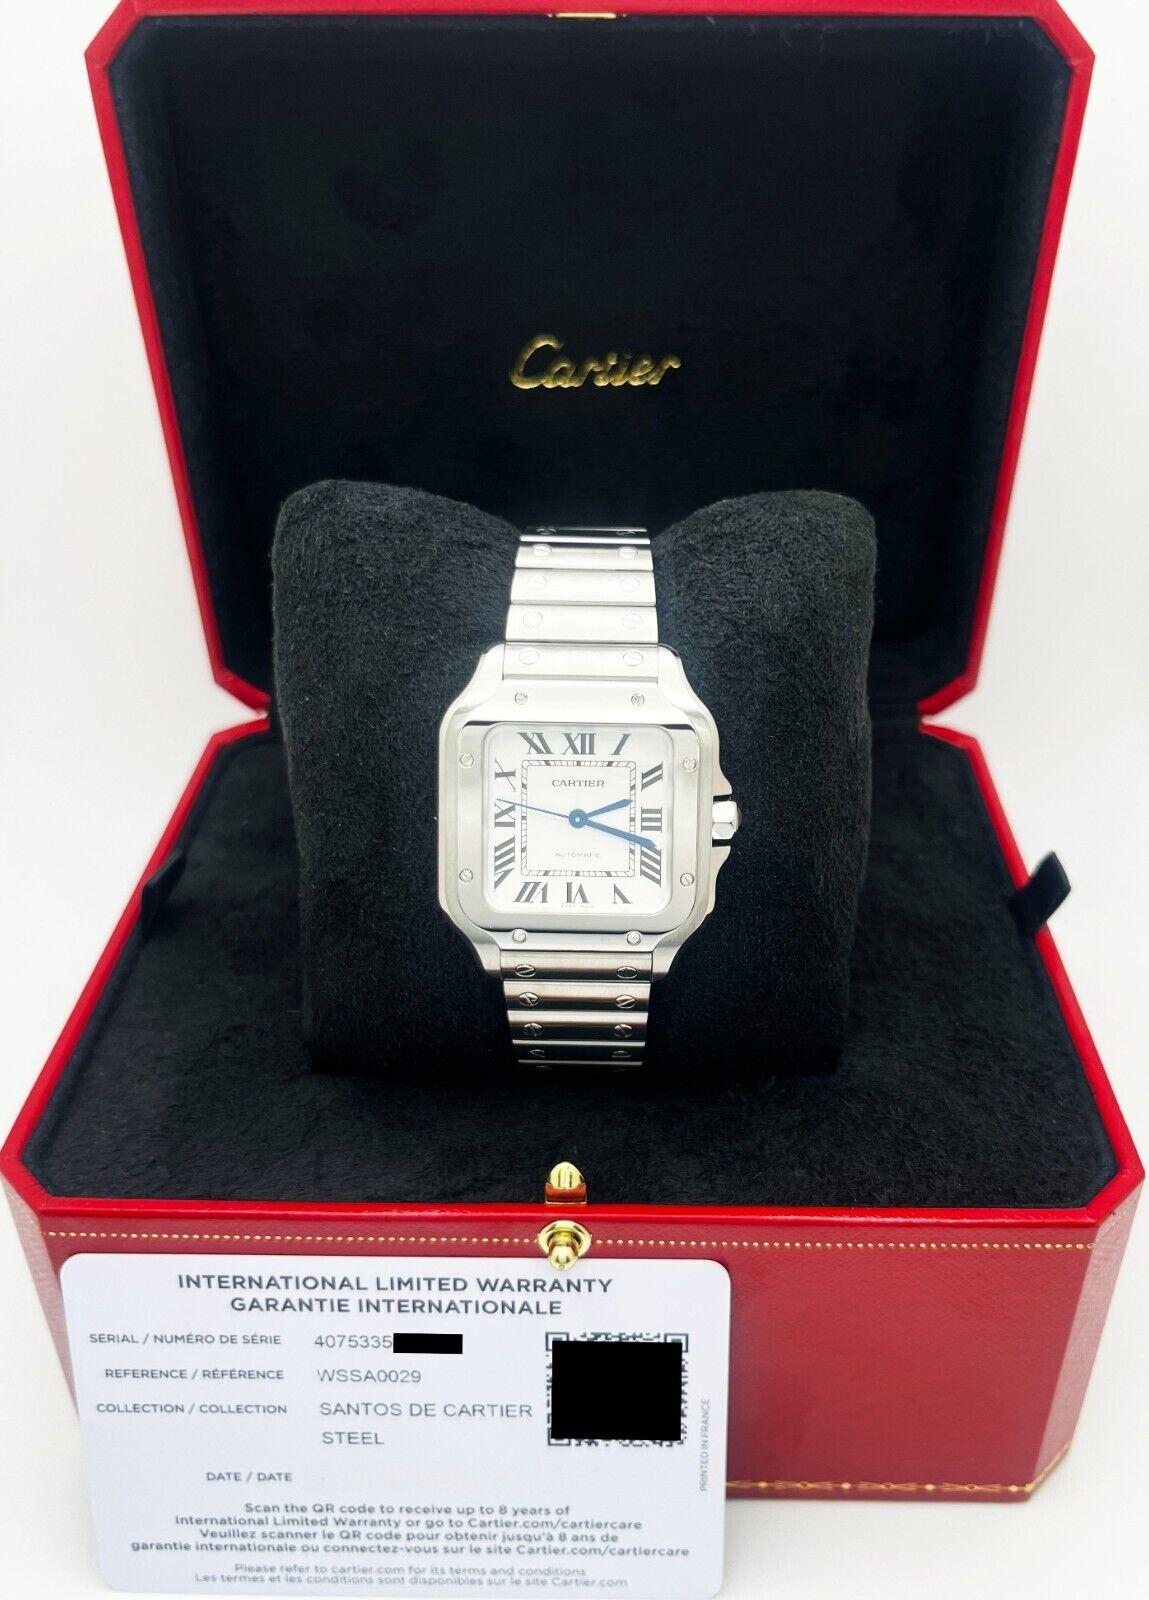 Style Number: WSSA0029 Ref 4075

Model: Santos - Size Medium

Case Material: Stainless Steel

Band: Stainless Steel

Bezel: Stainless Steel

Dial: Silver Dial

Face: Sapphire Crystal 

Case Size: 35.1 mm x 41.9 mm

 Includes: 

-Cartier Box &